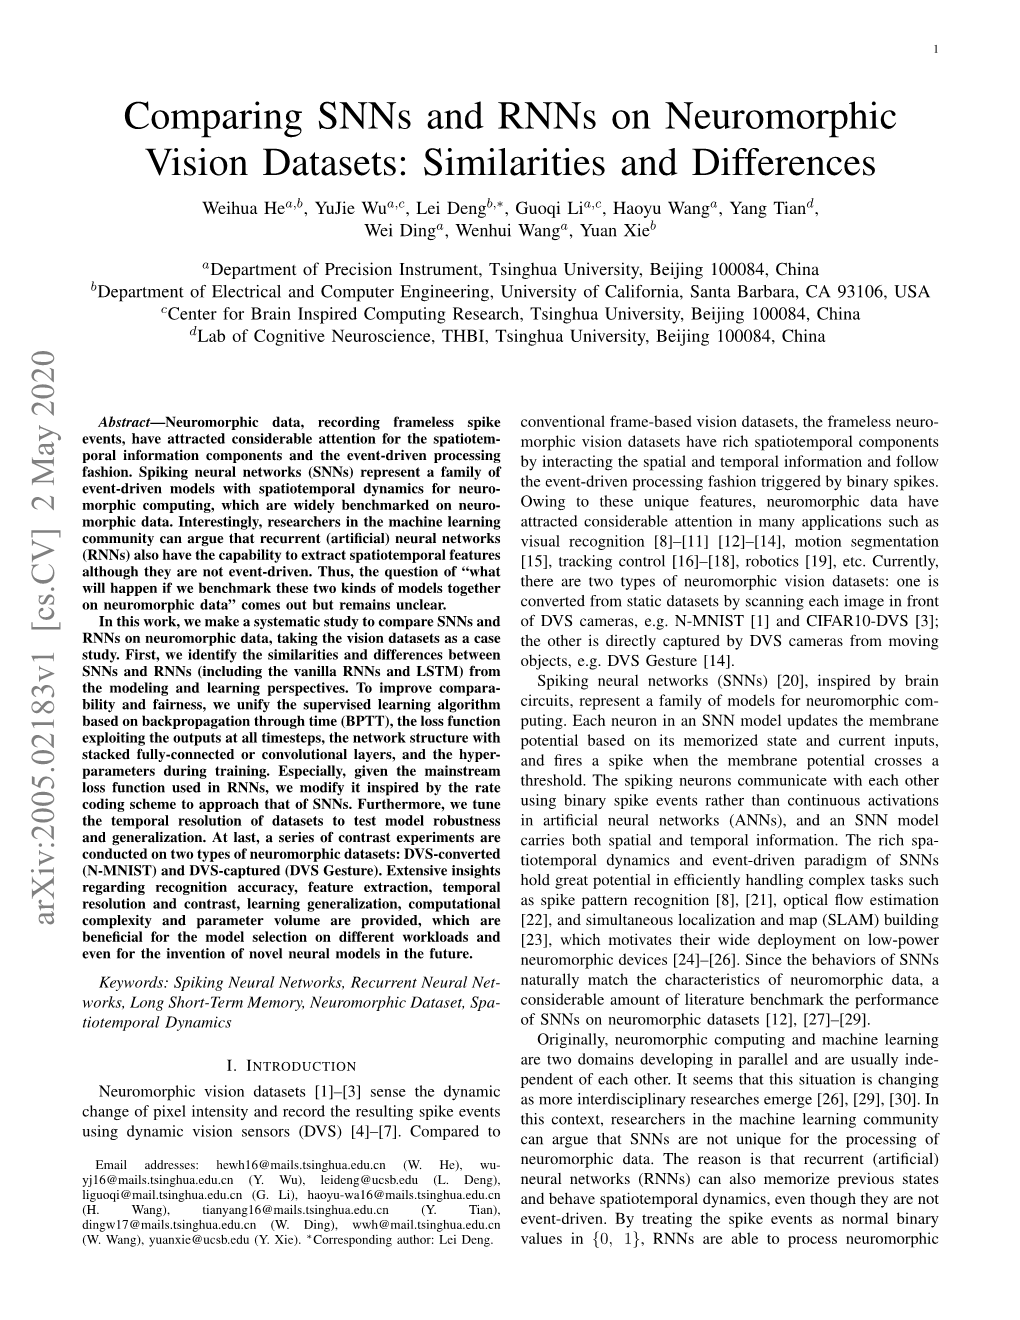 Comparing Snns and Rnns on Neuromorphic Vision Datasets